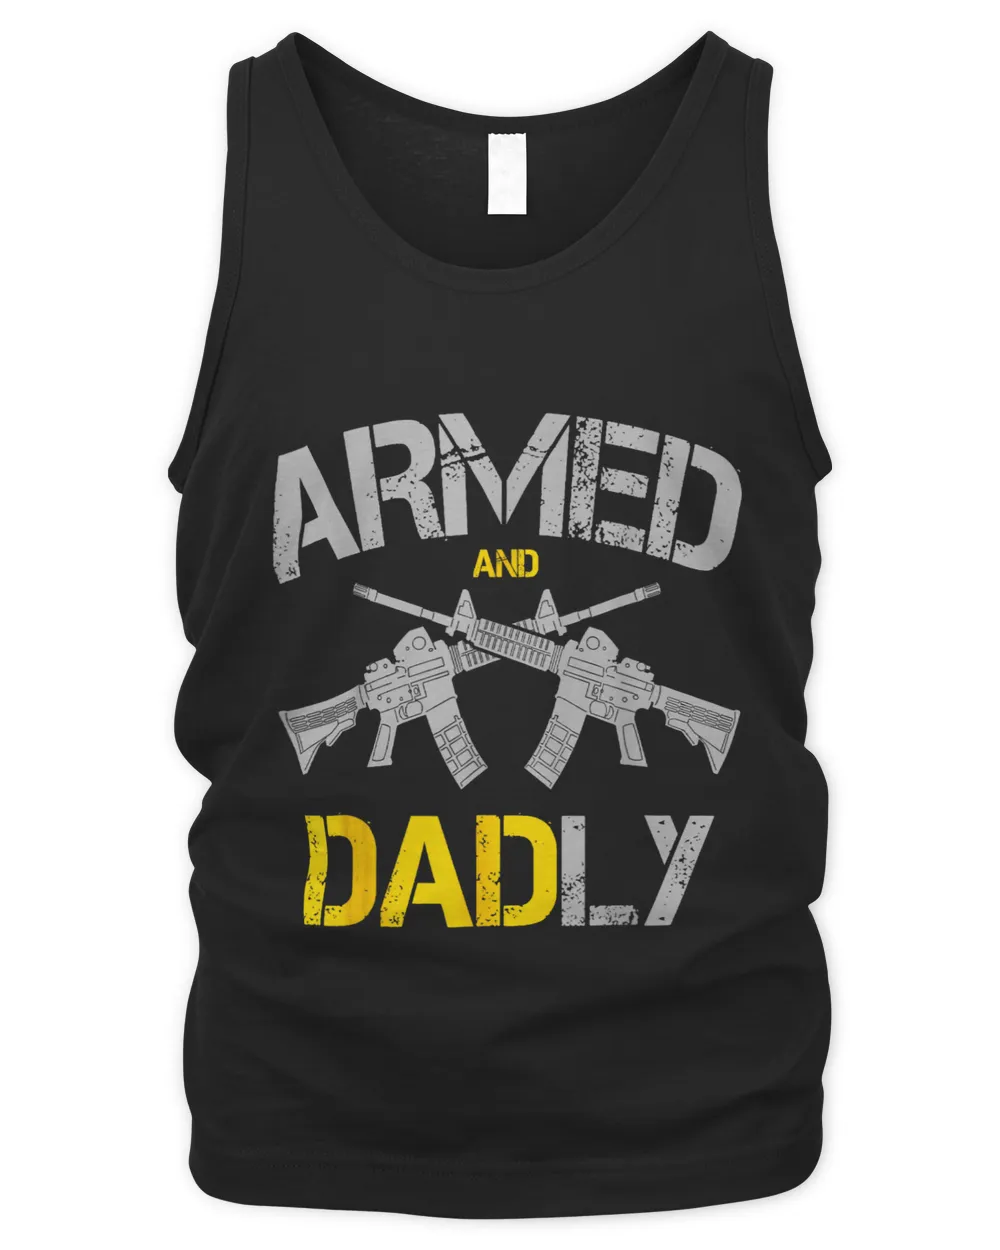 Guns Armed And Dadly Funny Deadly Father